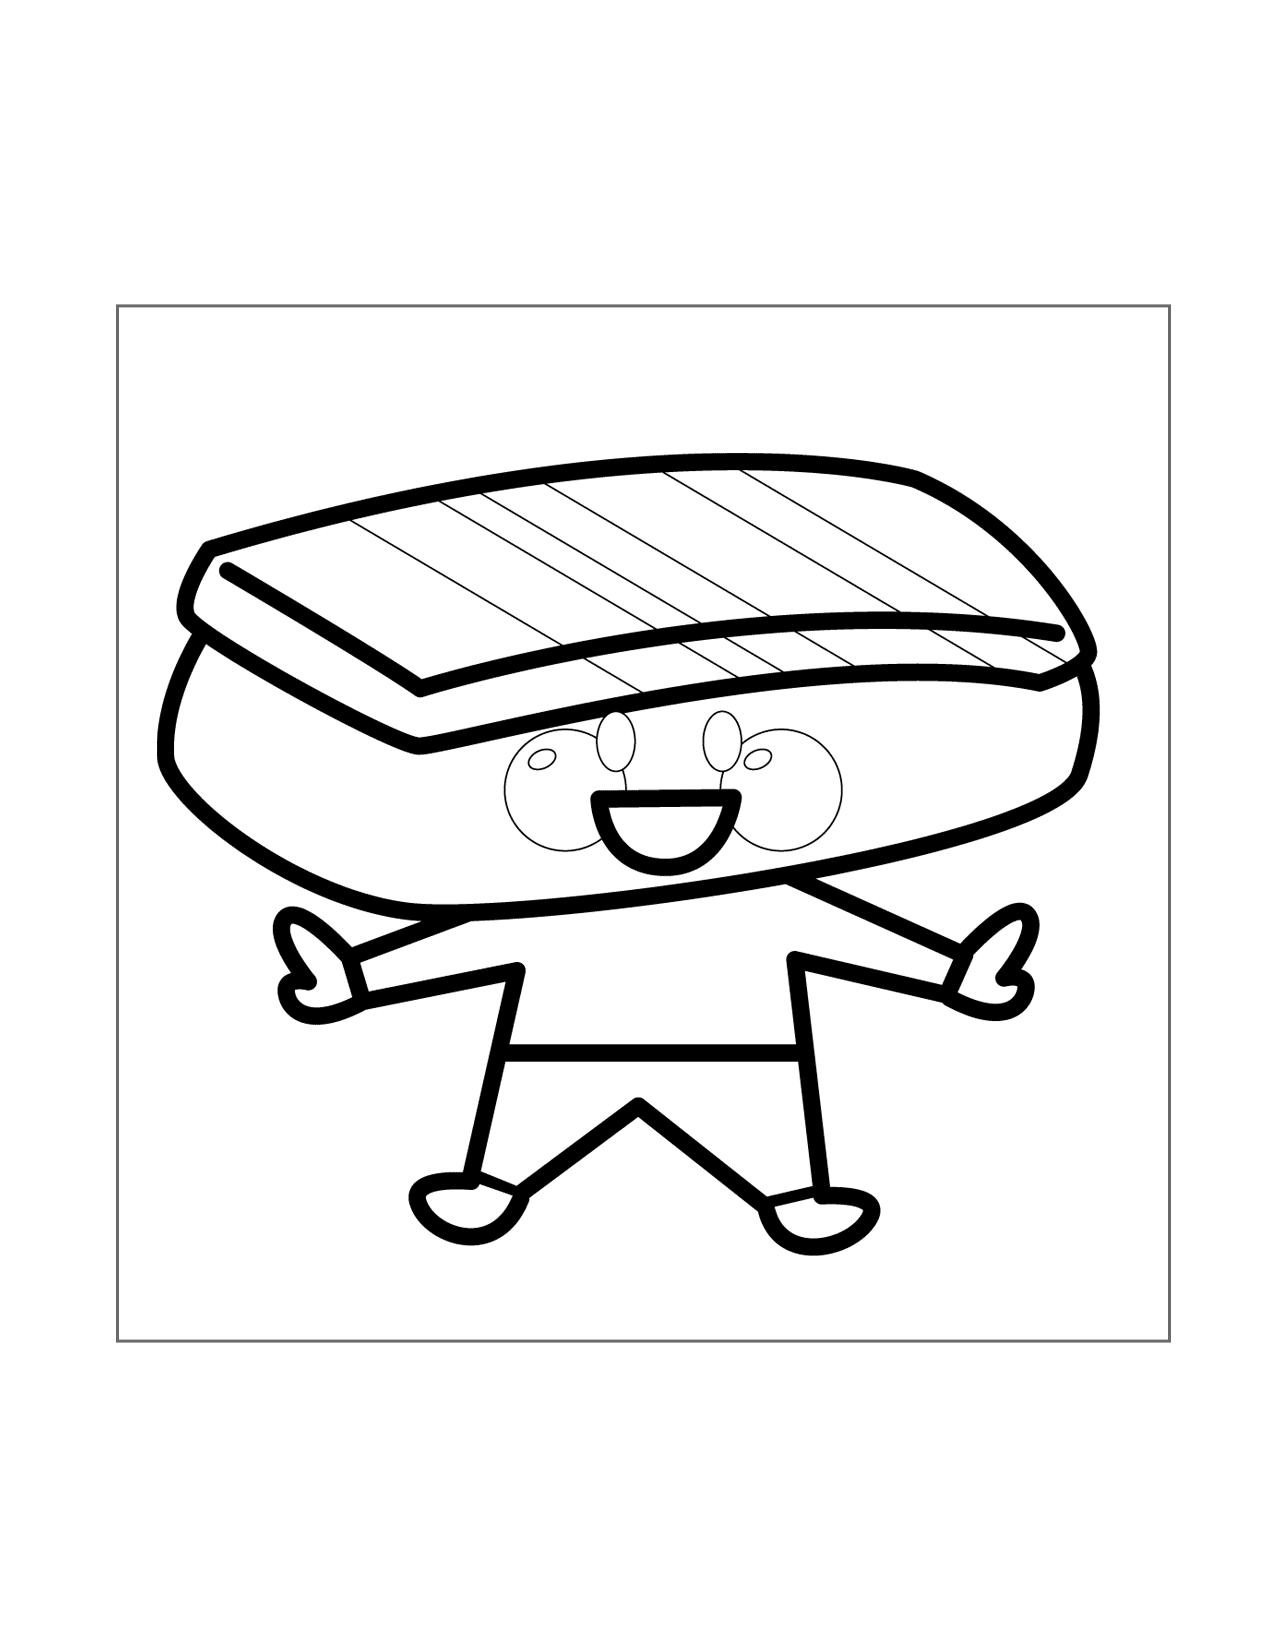 Sushi Head Coloring Page